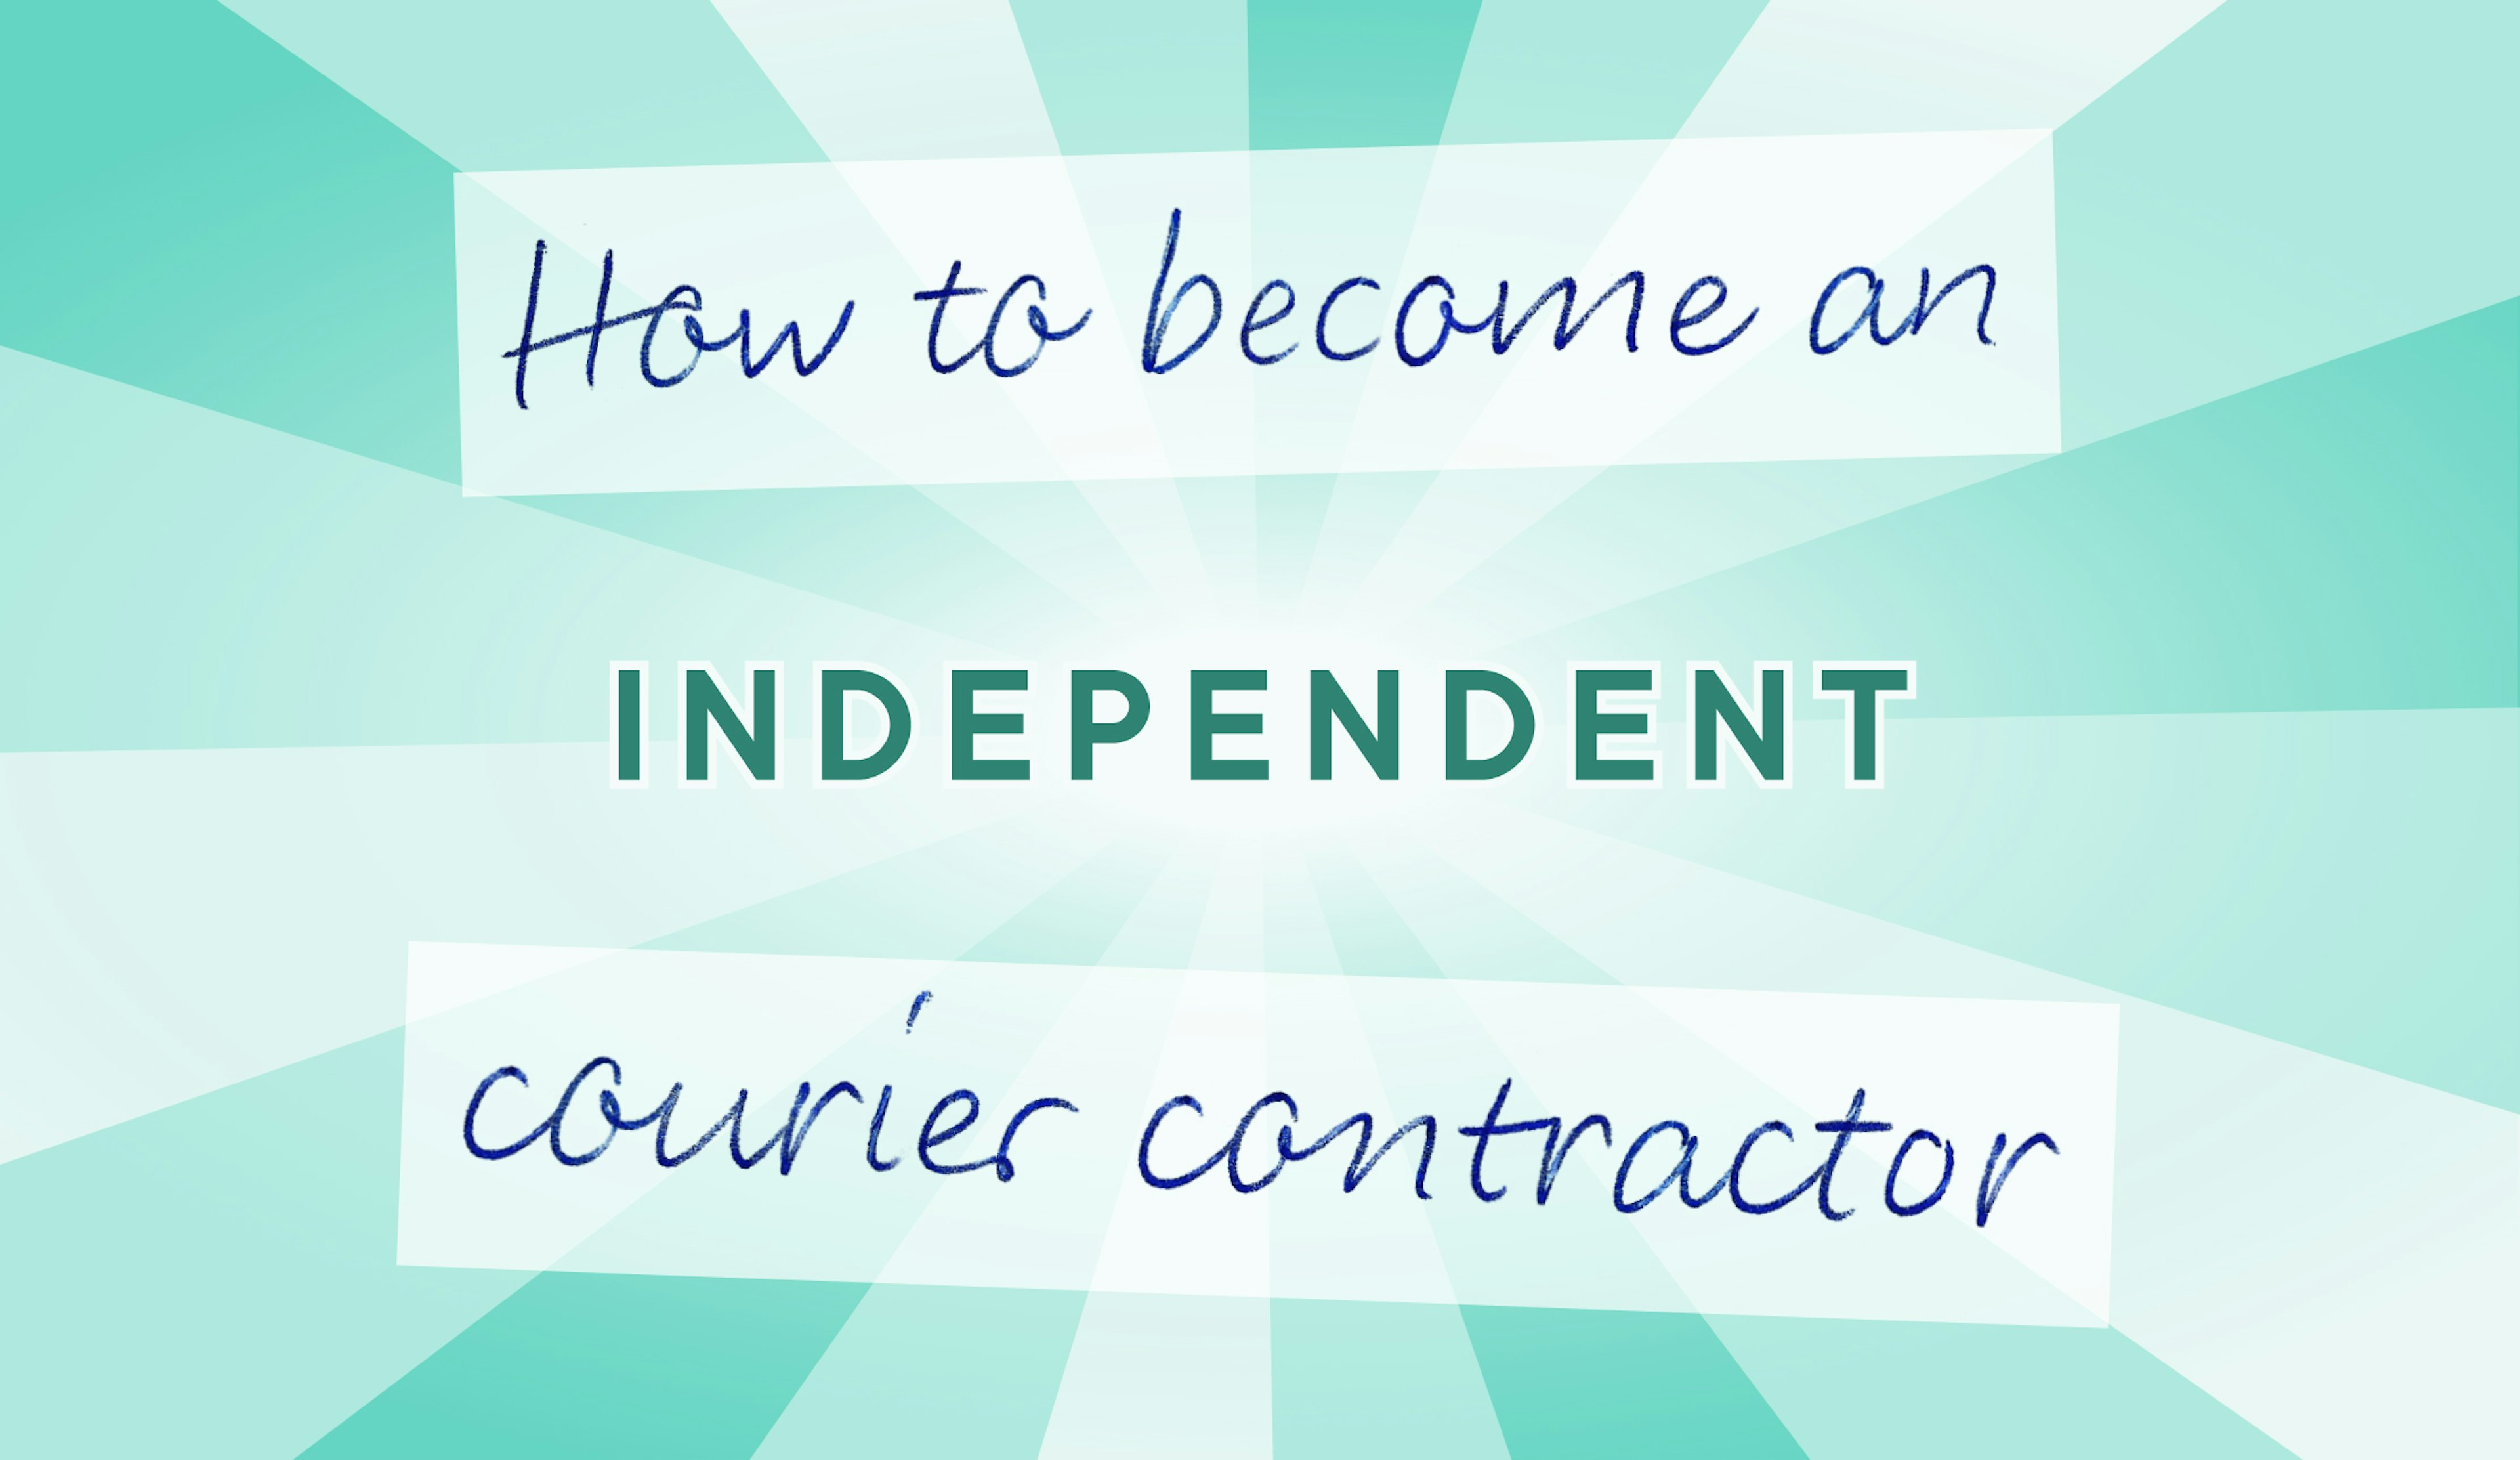 How to Become an Independent Courier Contractor